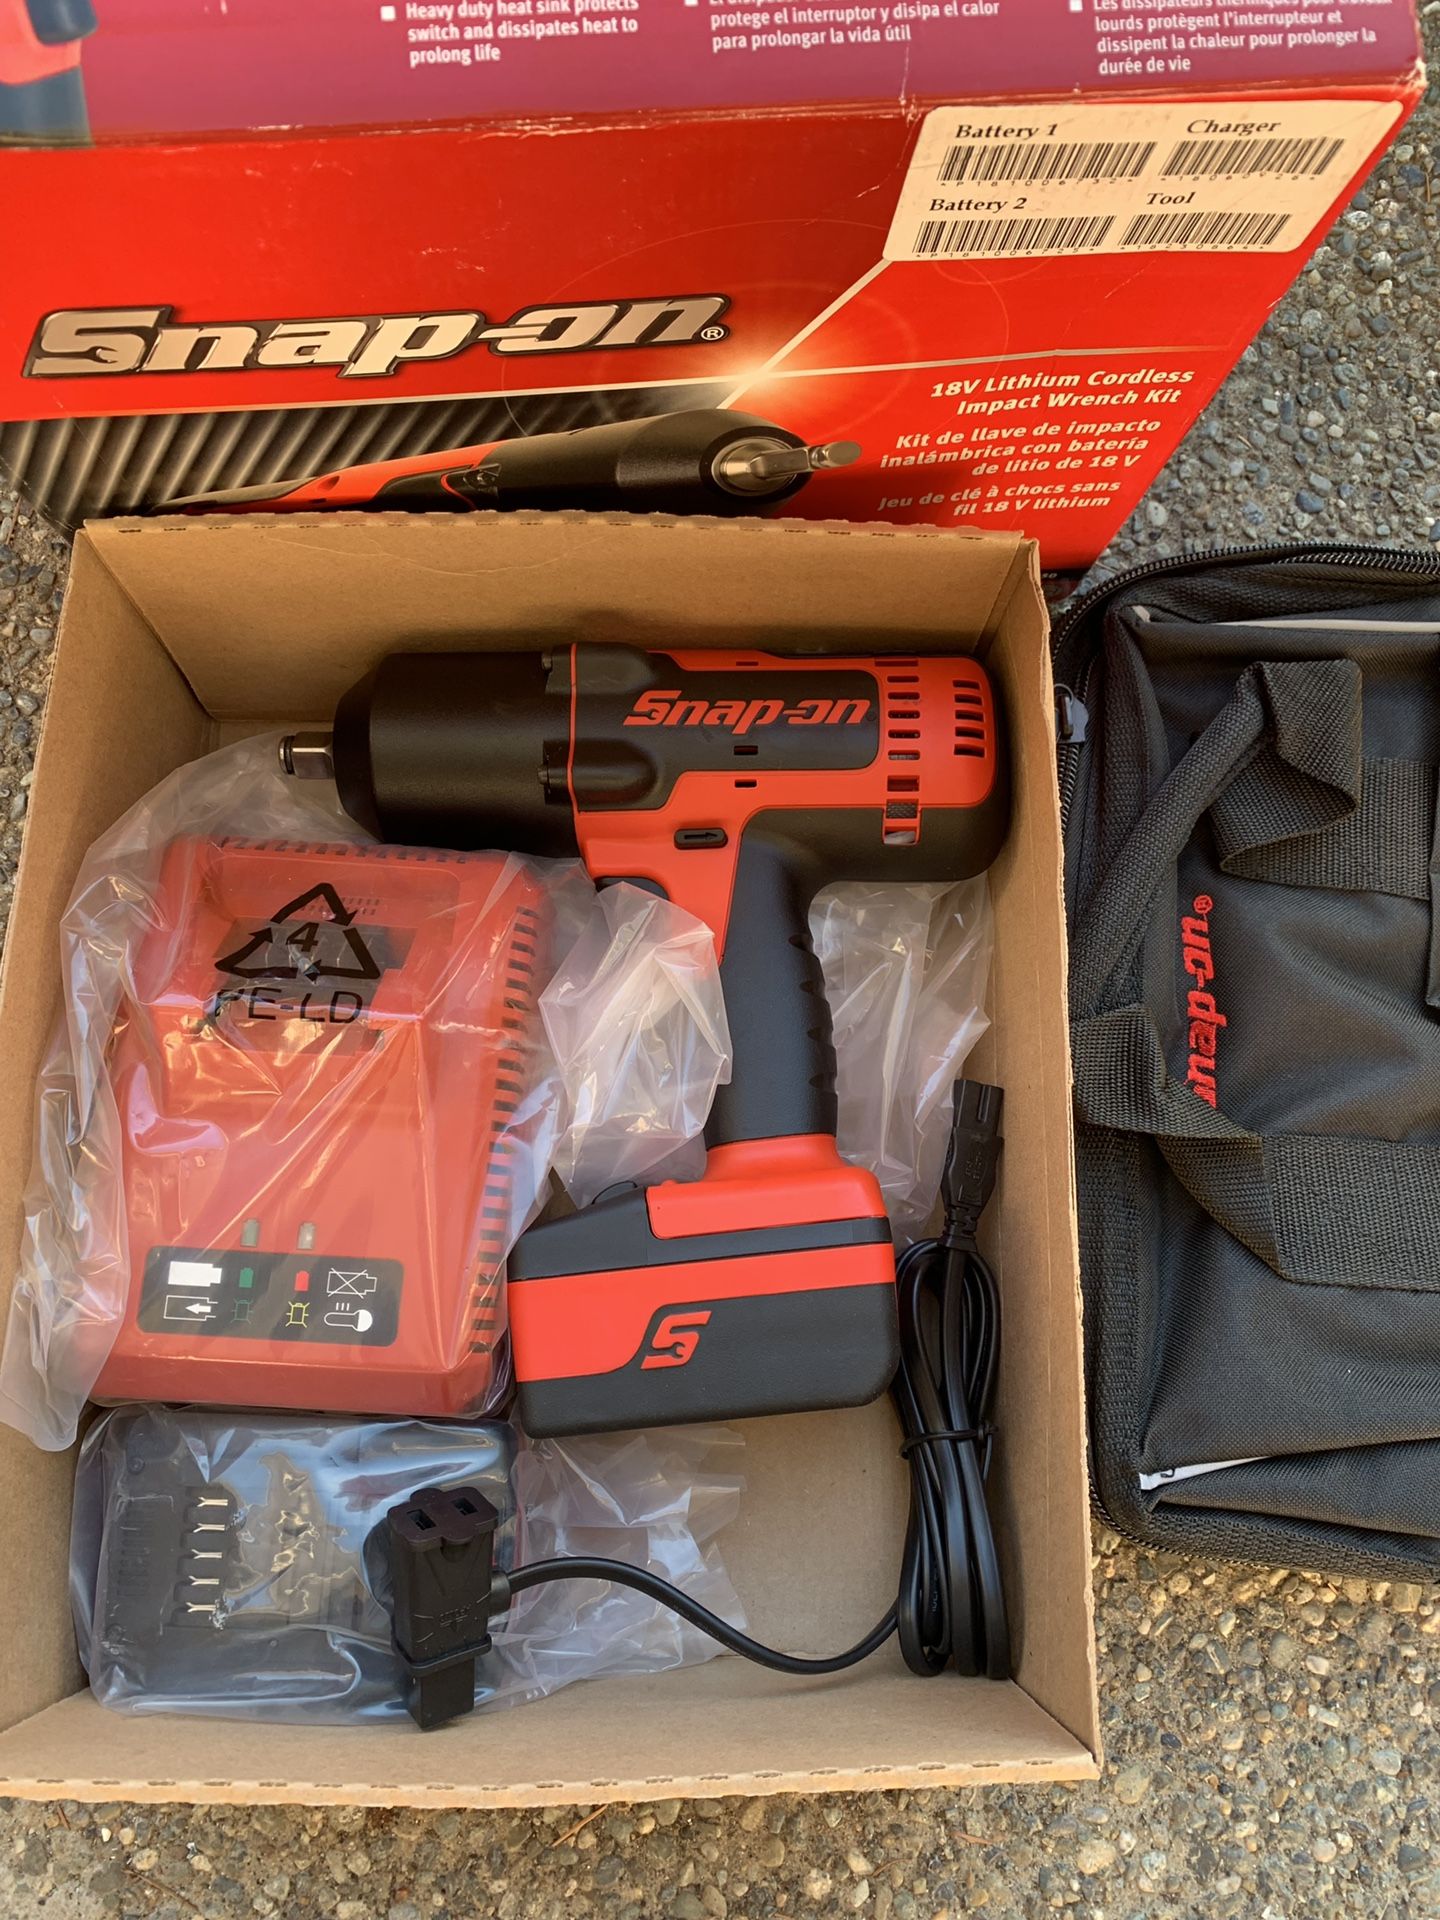 Snap-on, Cordless 1/2” drive Cordless Impact Wrench